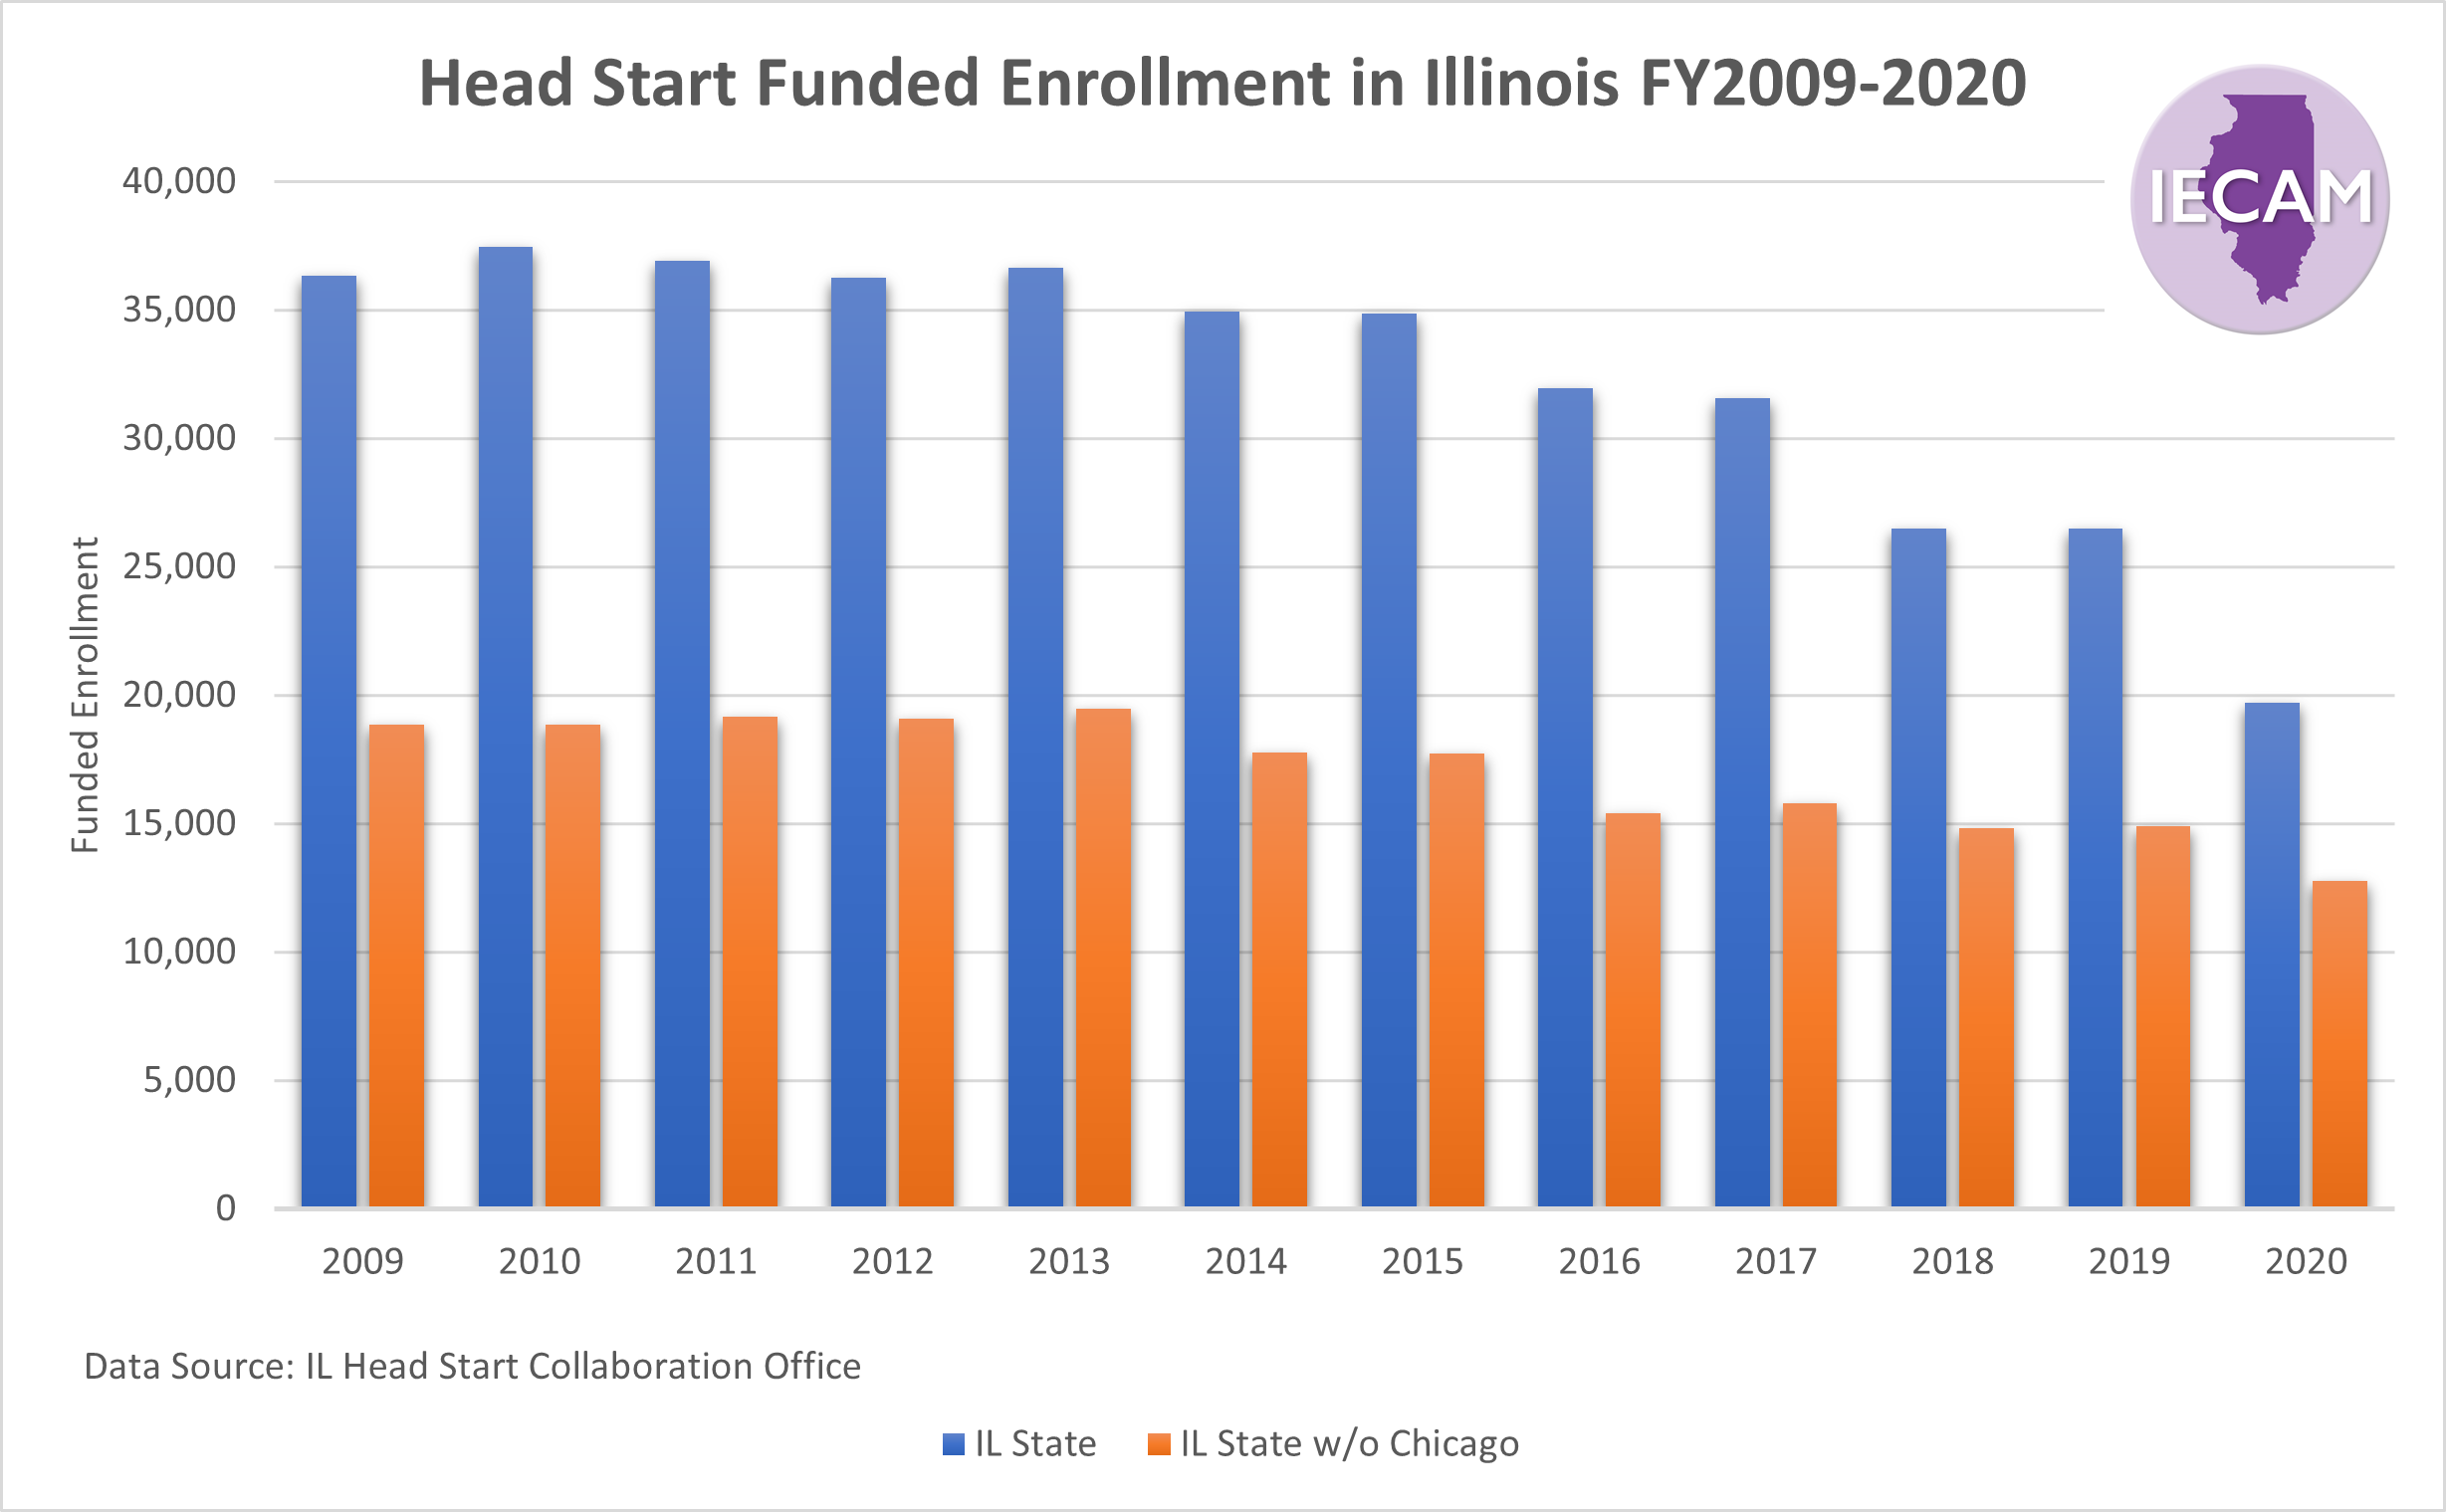 Head Start Funded Enrollment in Illinois 2009-2020